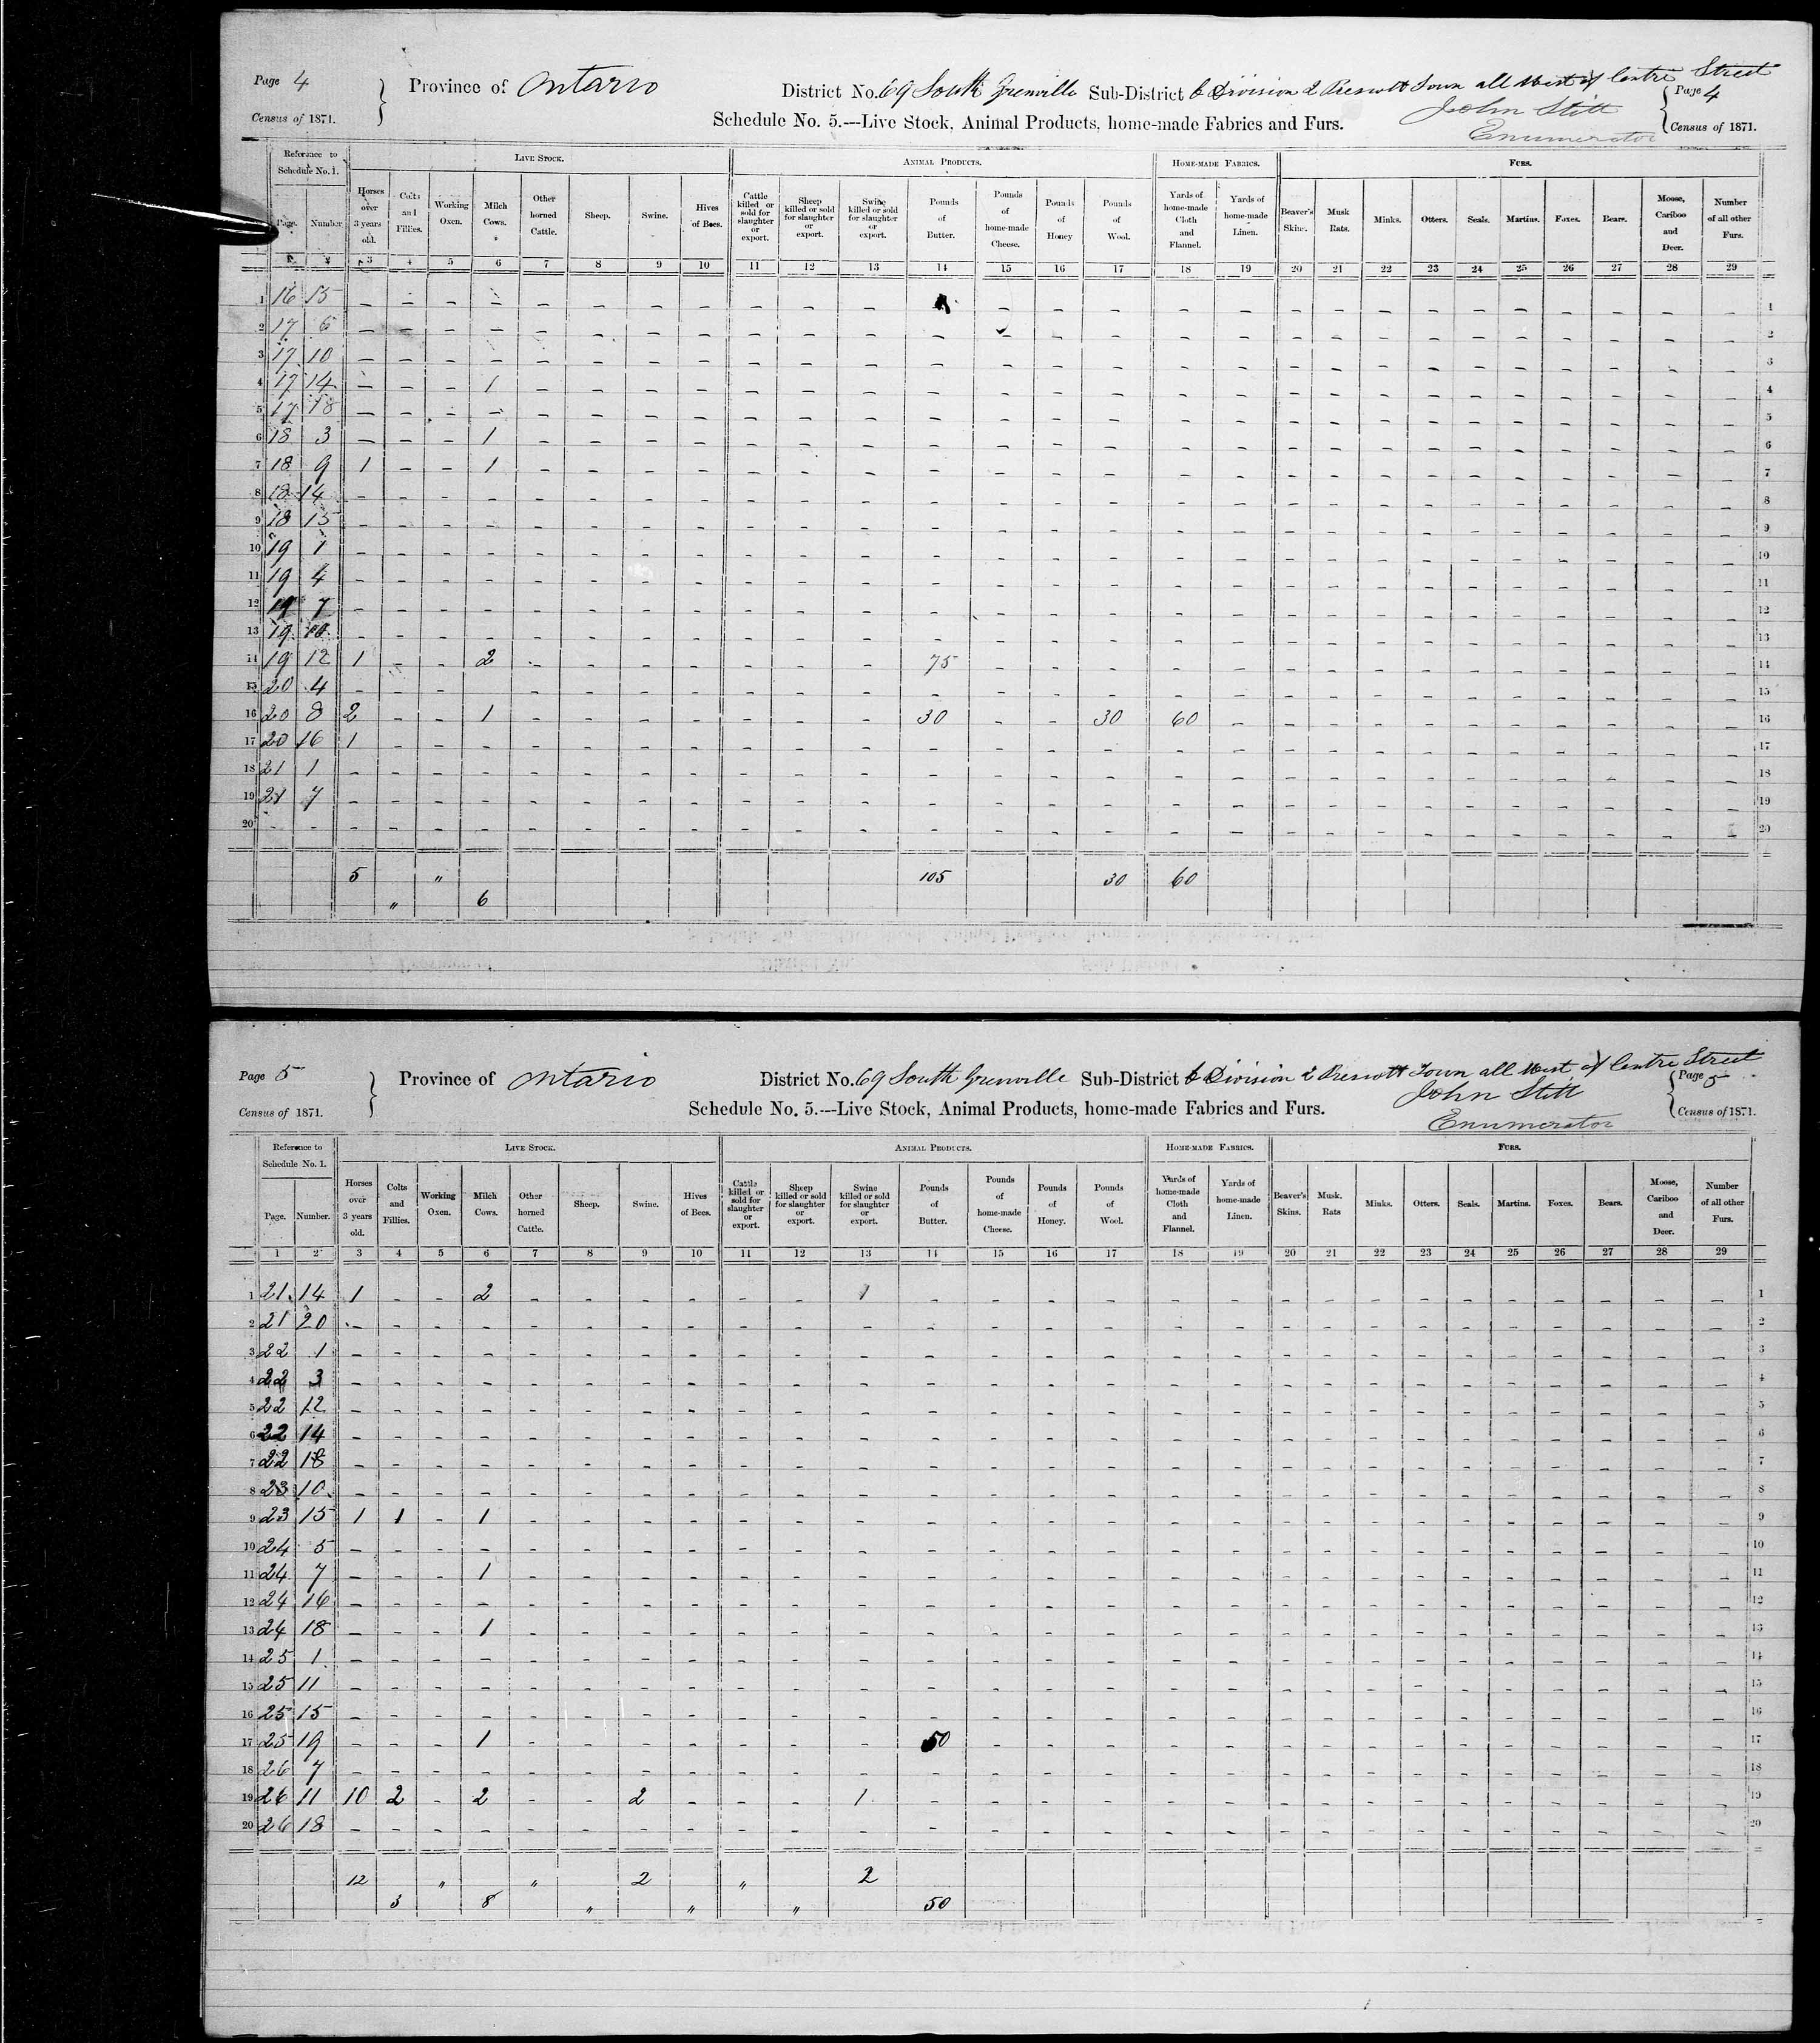 Title: Census of Canada, 1871 - Mikan Number: 142105 - Microform: c-10003